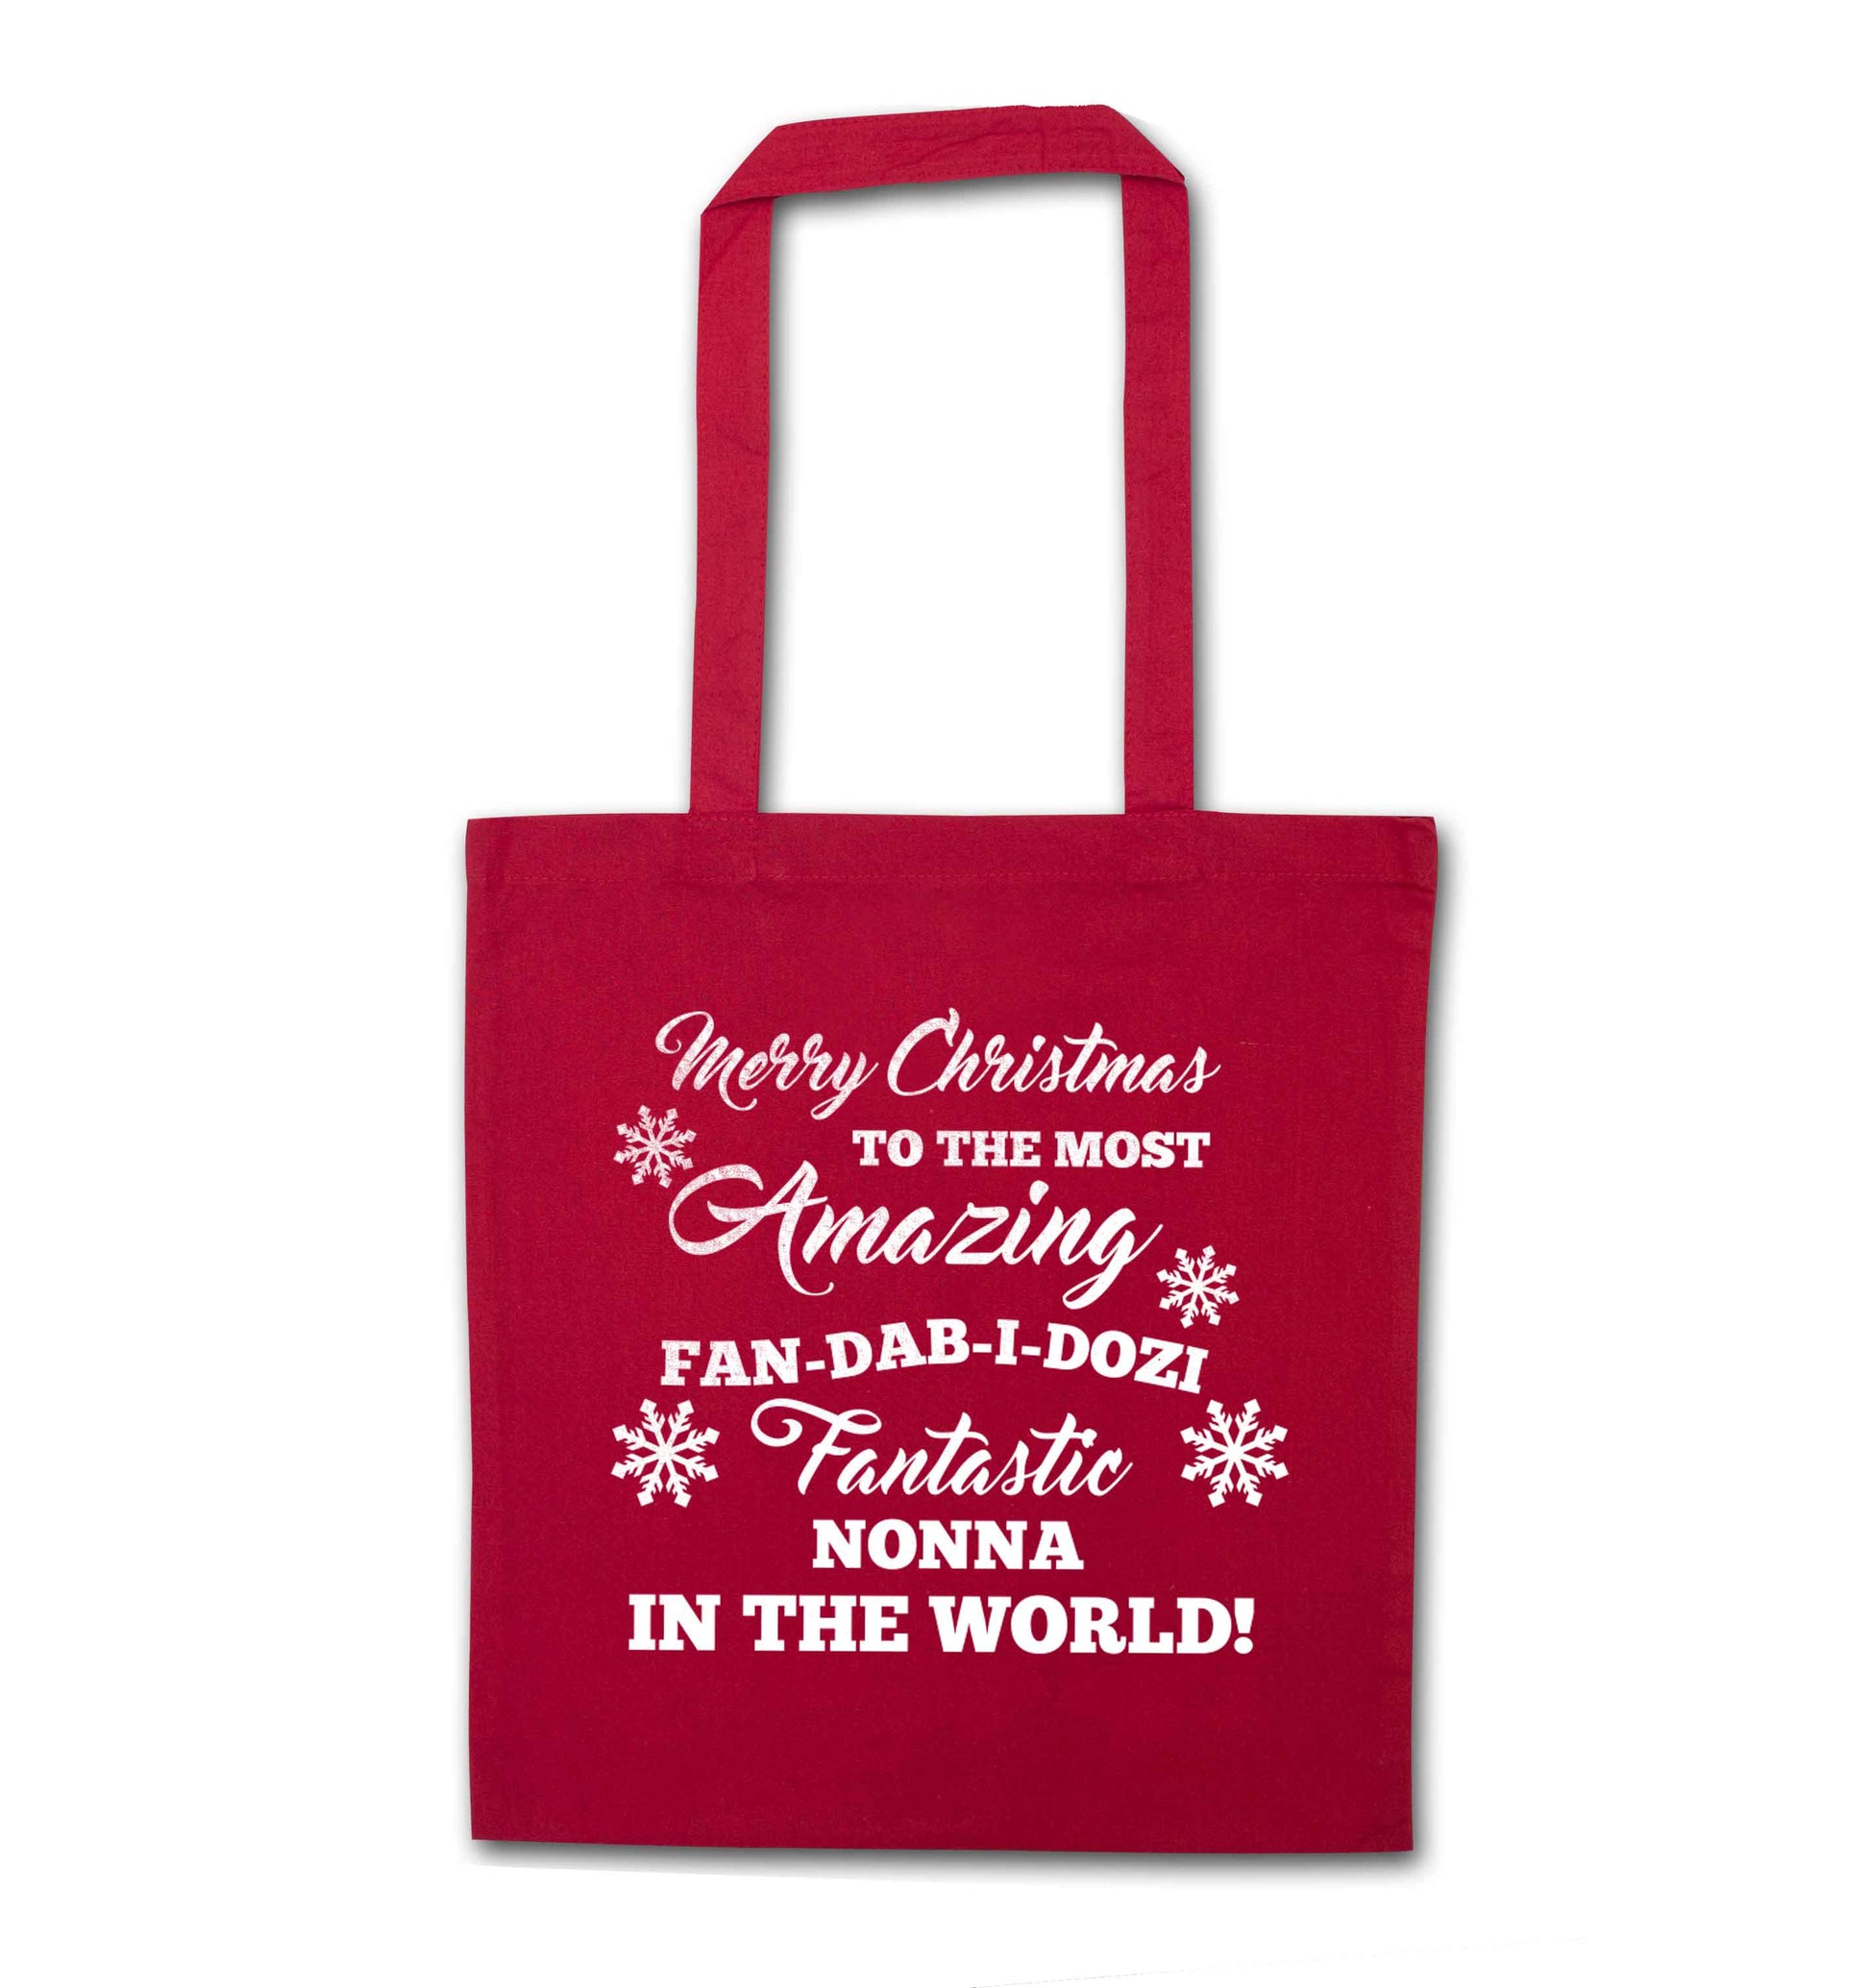 Merry Christmas to the most amazing fan-dab-i-dozi fantasic Nonna in the world red tote bag